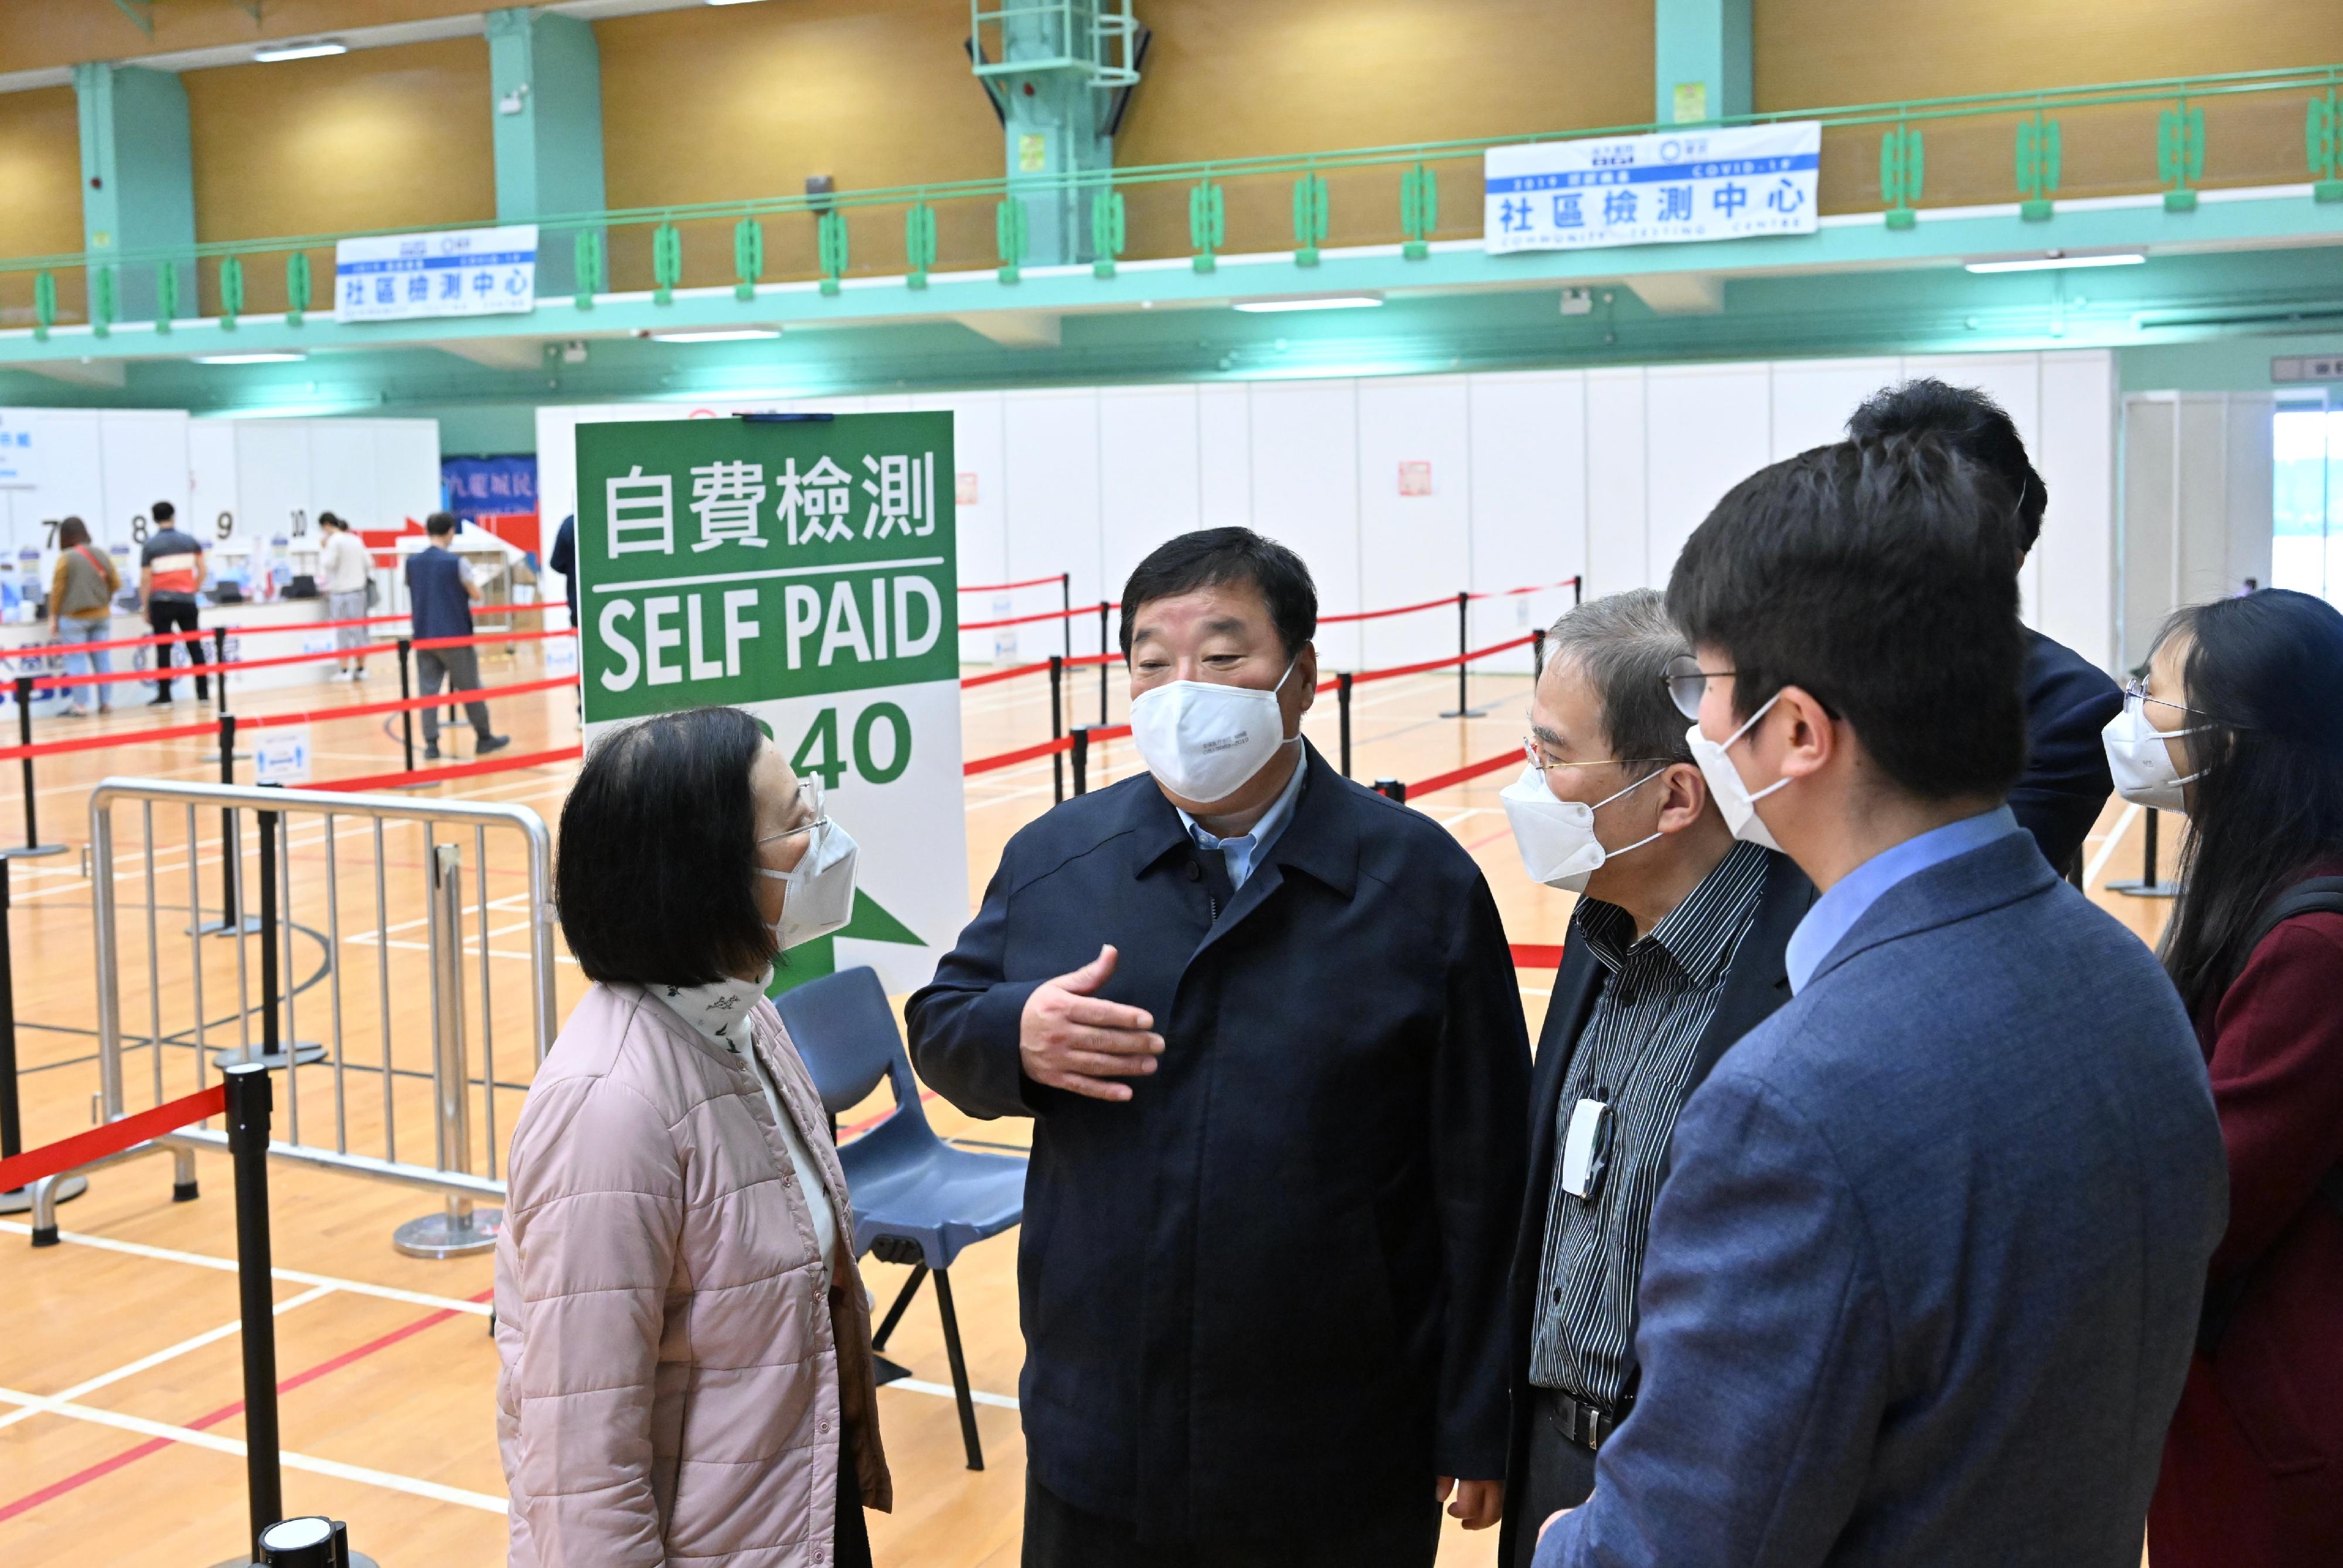 The Secretary for Food and Health, Professor Sophia Chan (first left); and the Mainland expert delegation led by the Head of the National Health Commission's COVID-19 leading task force, Professor Liang Wannian (second left); visit the community testing centre located at To Kwa Wan Sports Centre today (March 5), to learn about its operation, service arrangements and specimen collection process.